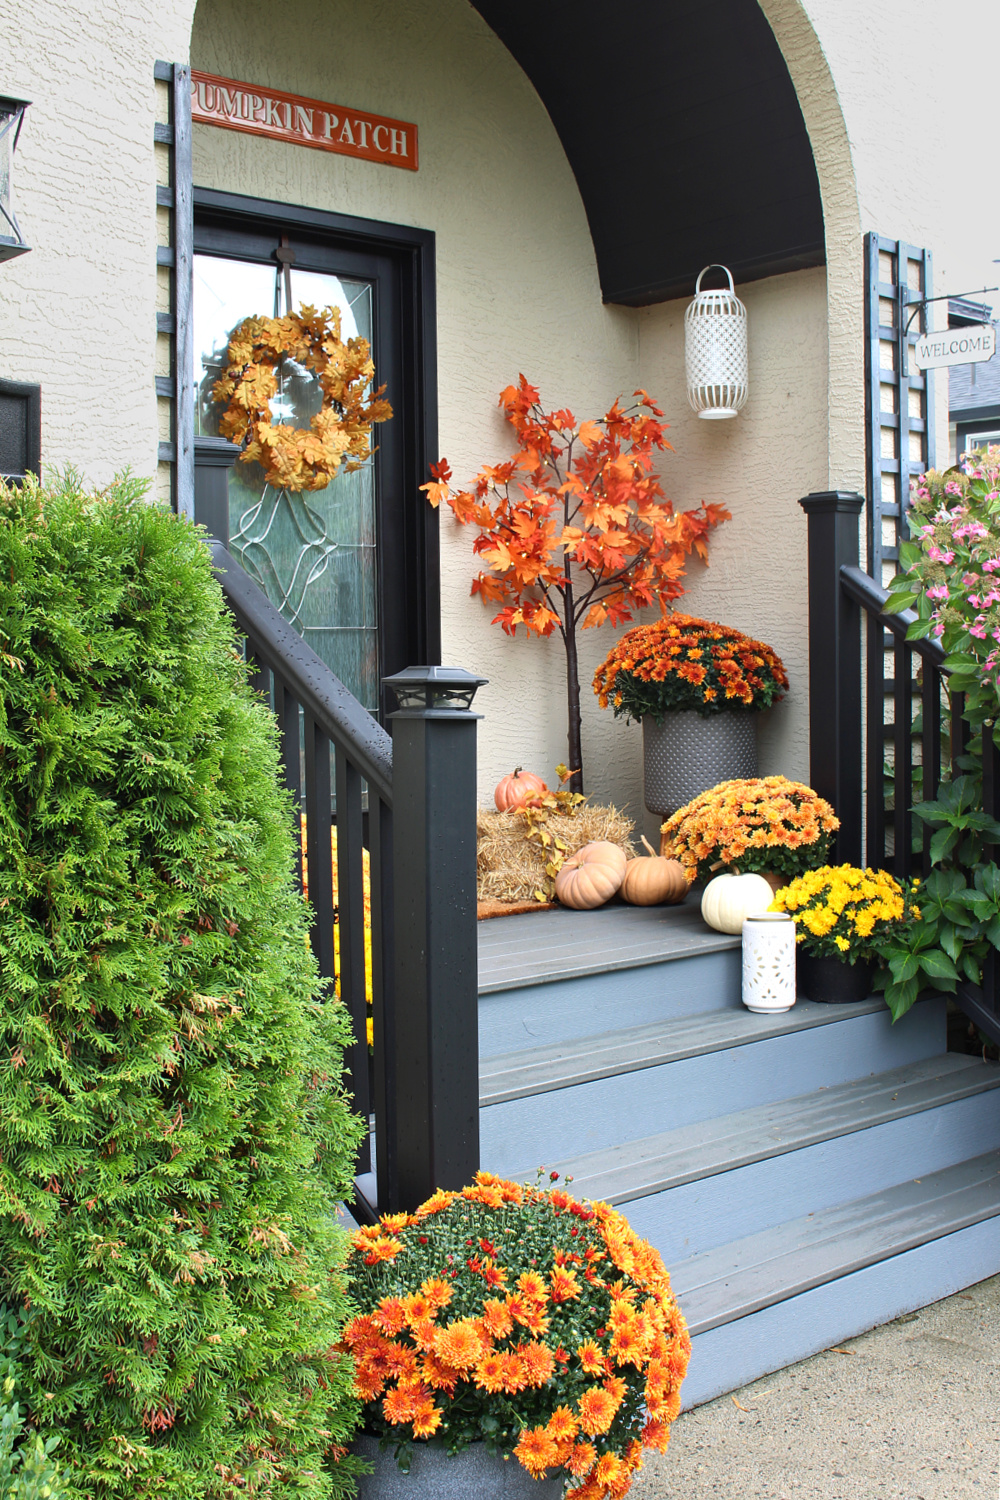 Fall front porch with mums, pumpkins and lighted trees.